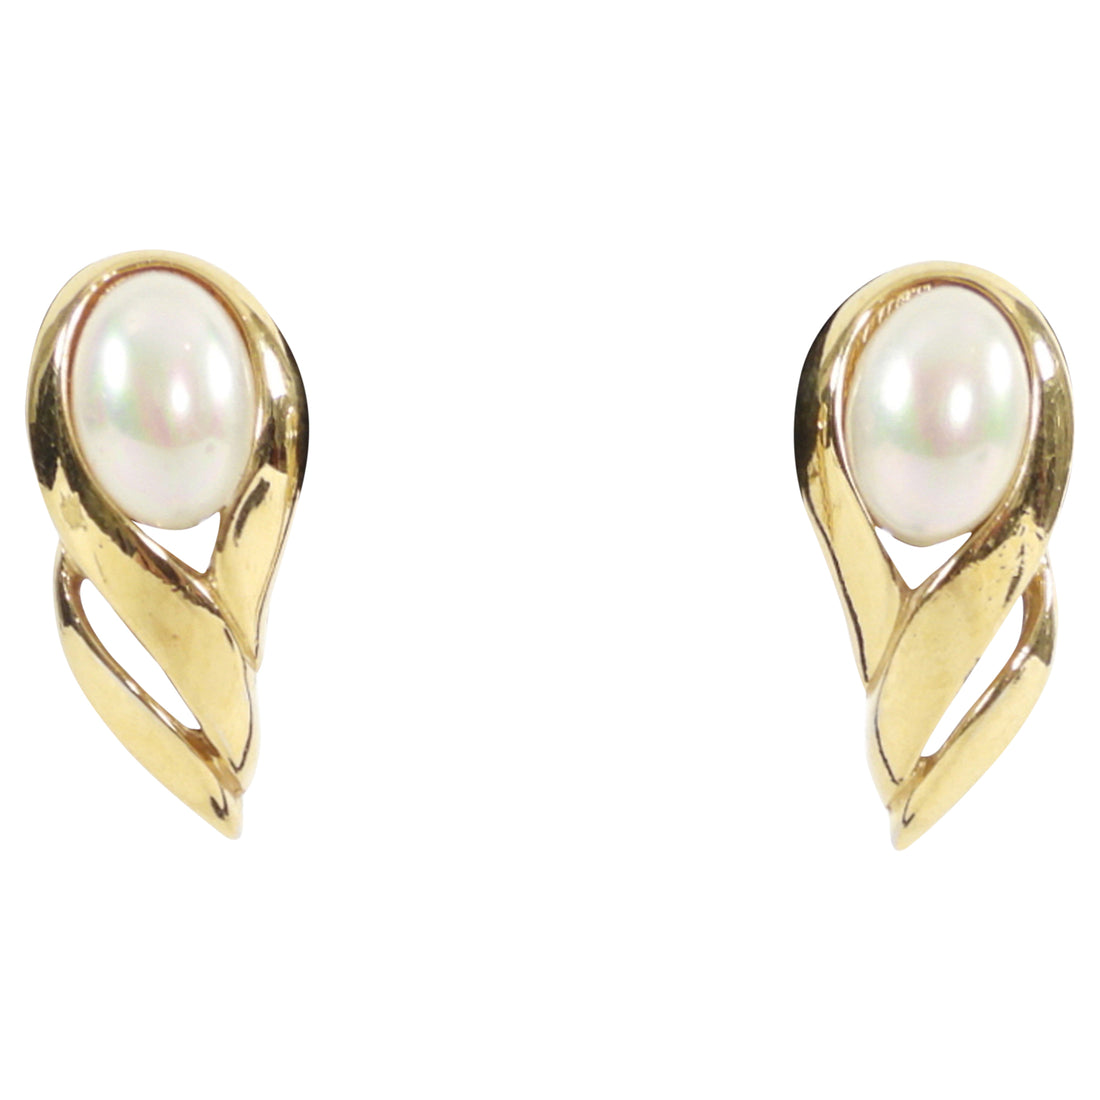 Christian Dior Vintage Goldtone Faux Pearl Clip Earrings